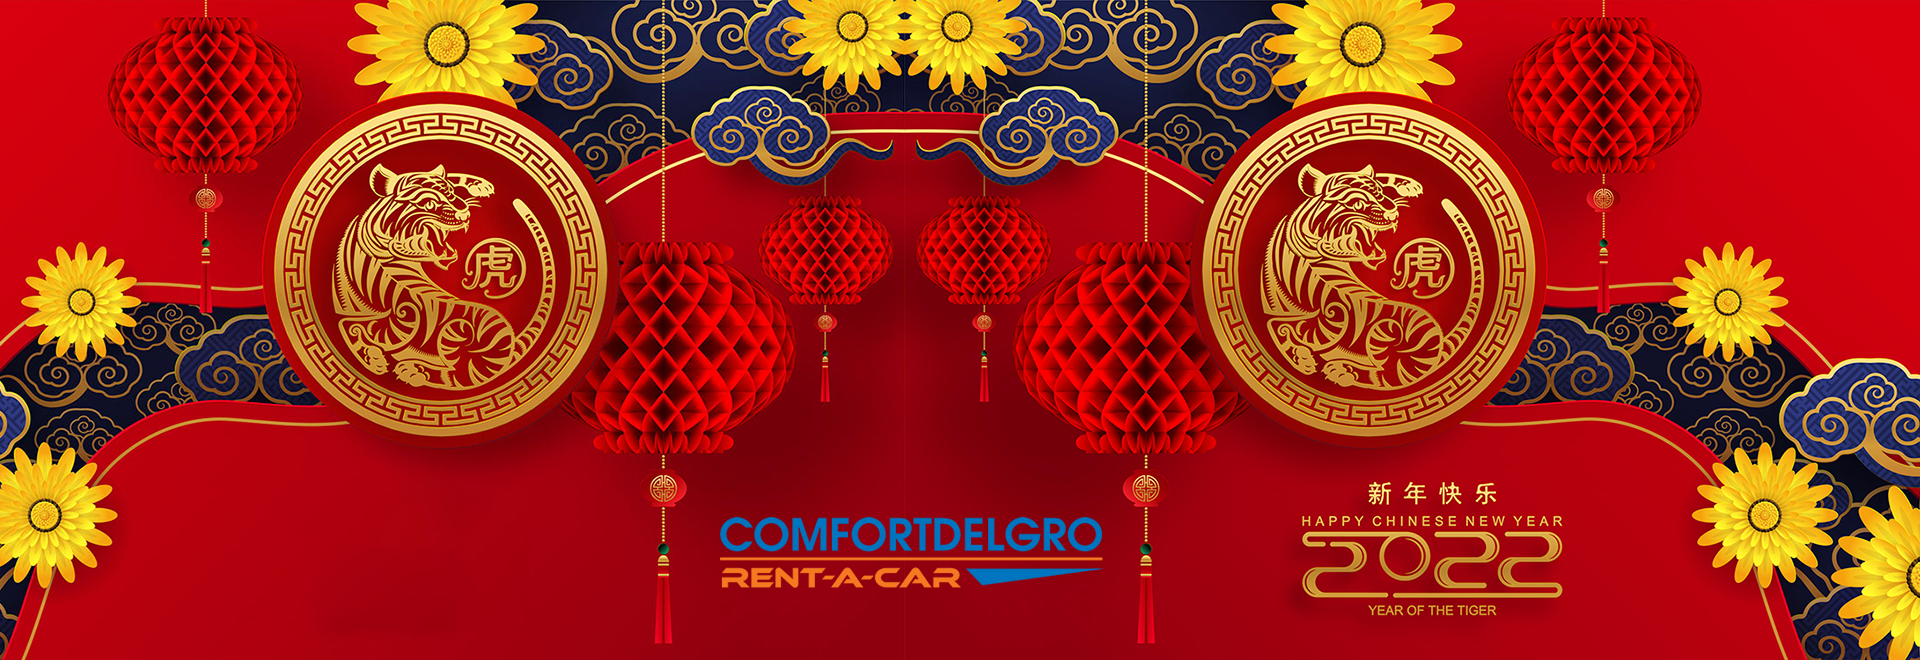 Chinese New Year 2022 Car Rental Promotion